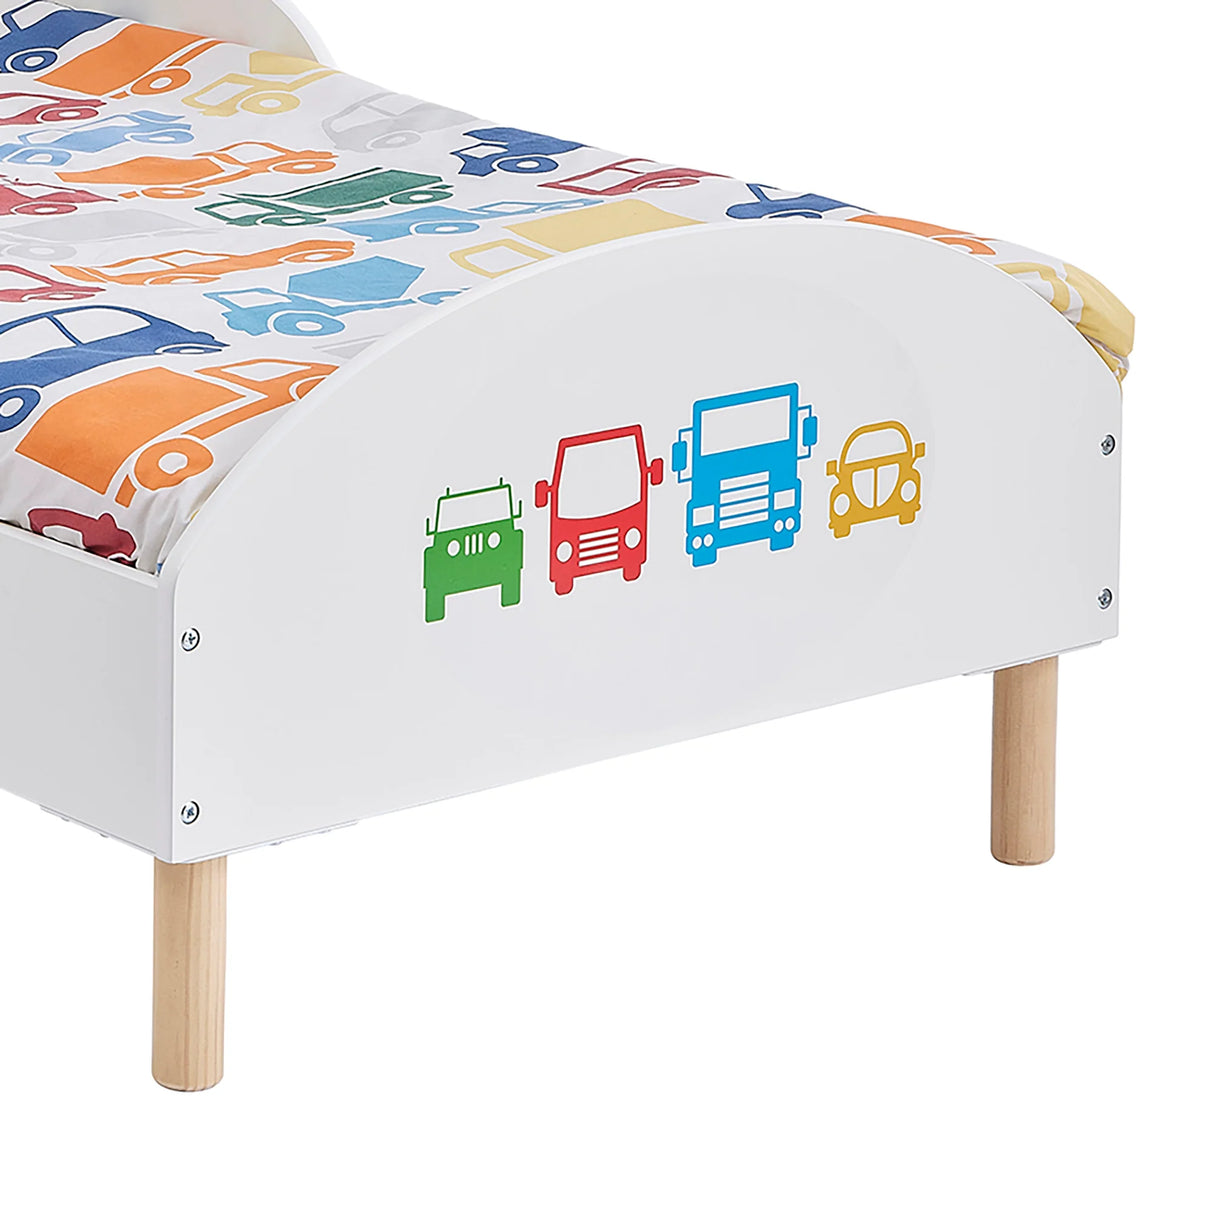 Toddler Bed - Cars